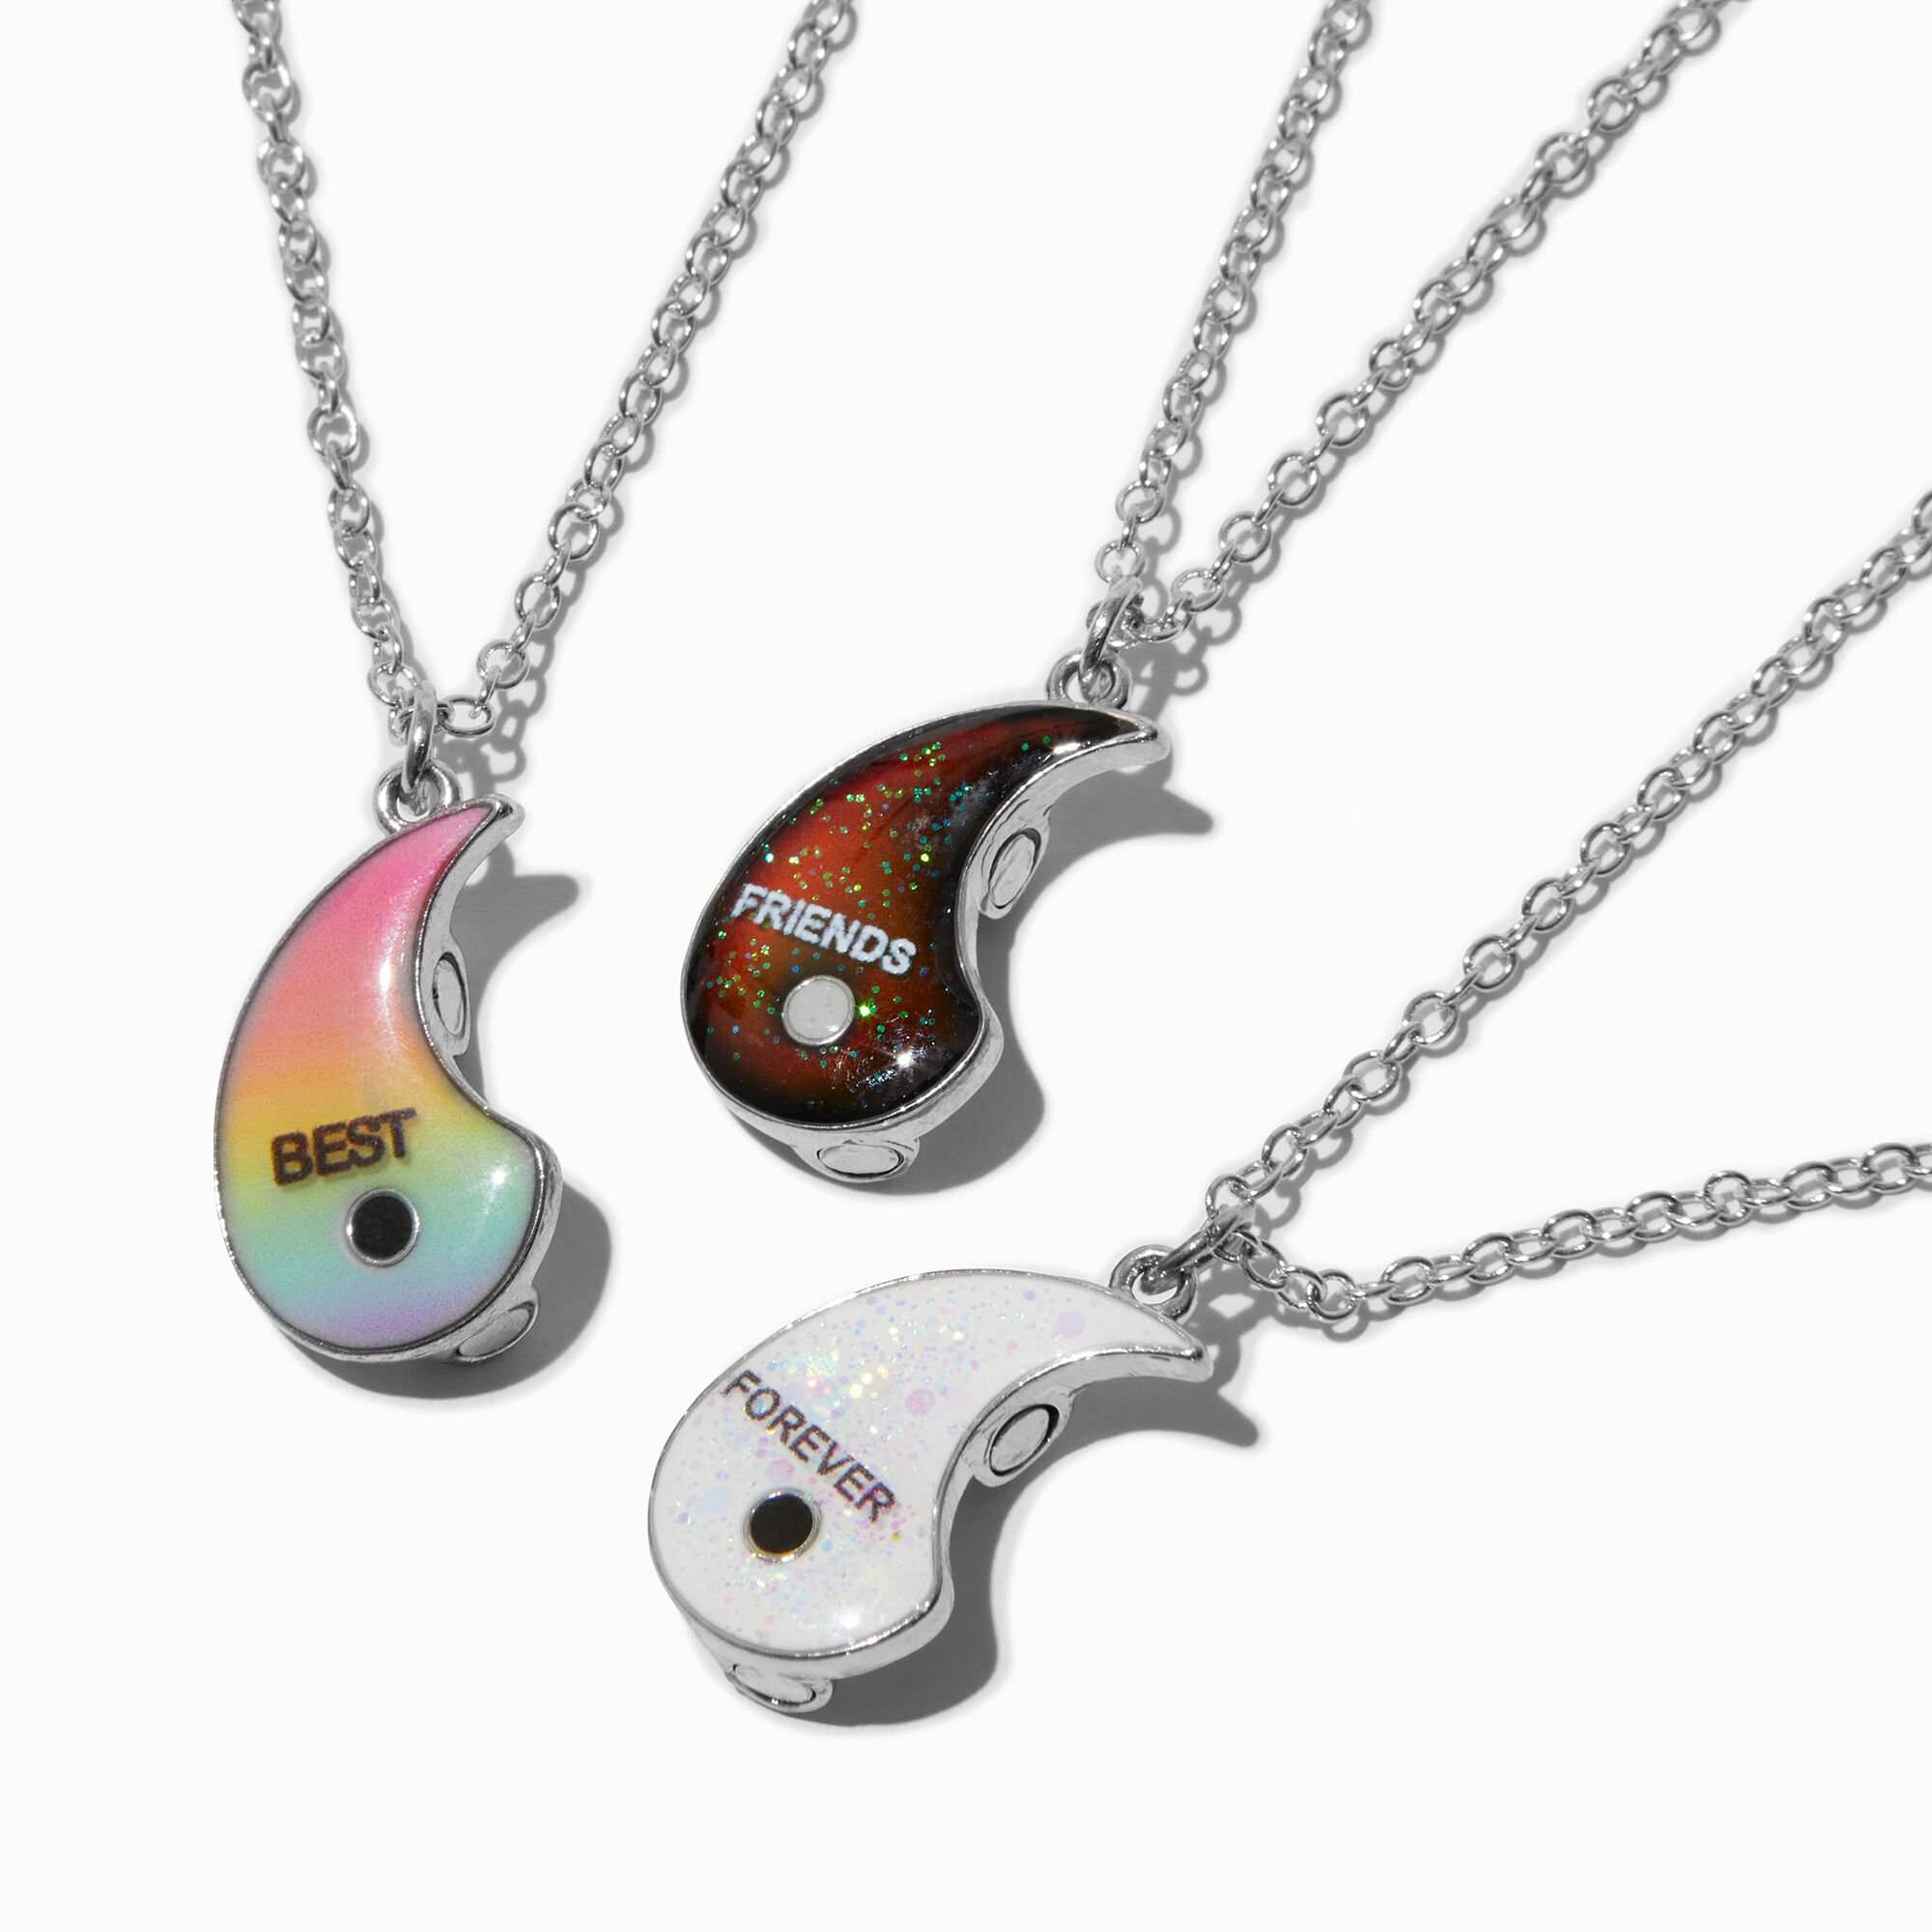 View Claires Best Friends ColorChanging Glow In The Dark Yin Yang Pendant Necklaces 3 Pack Silver information